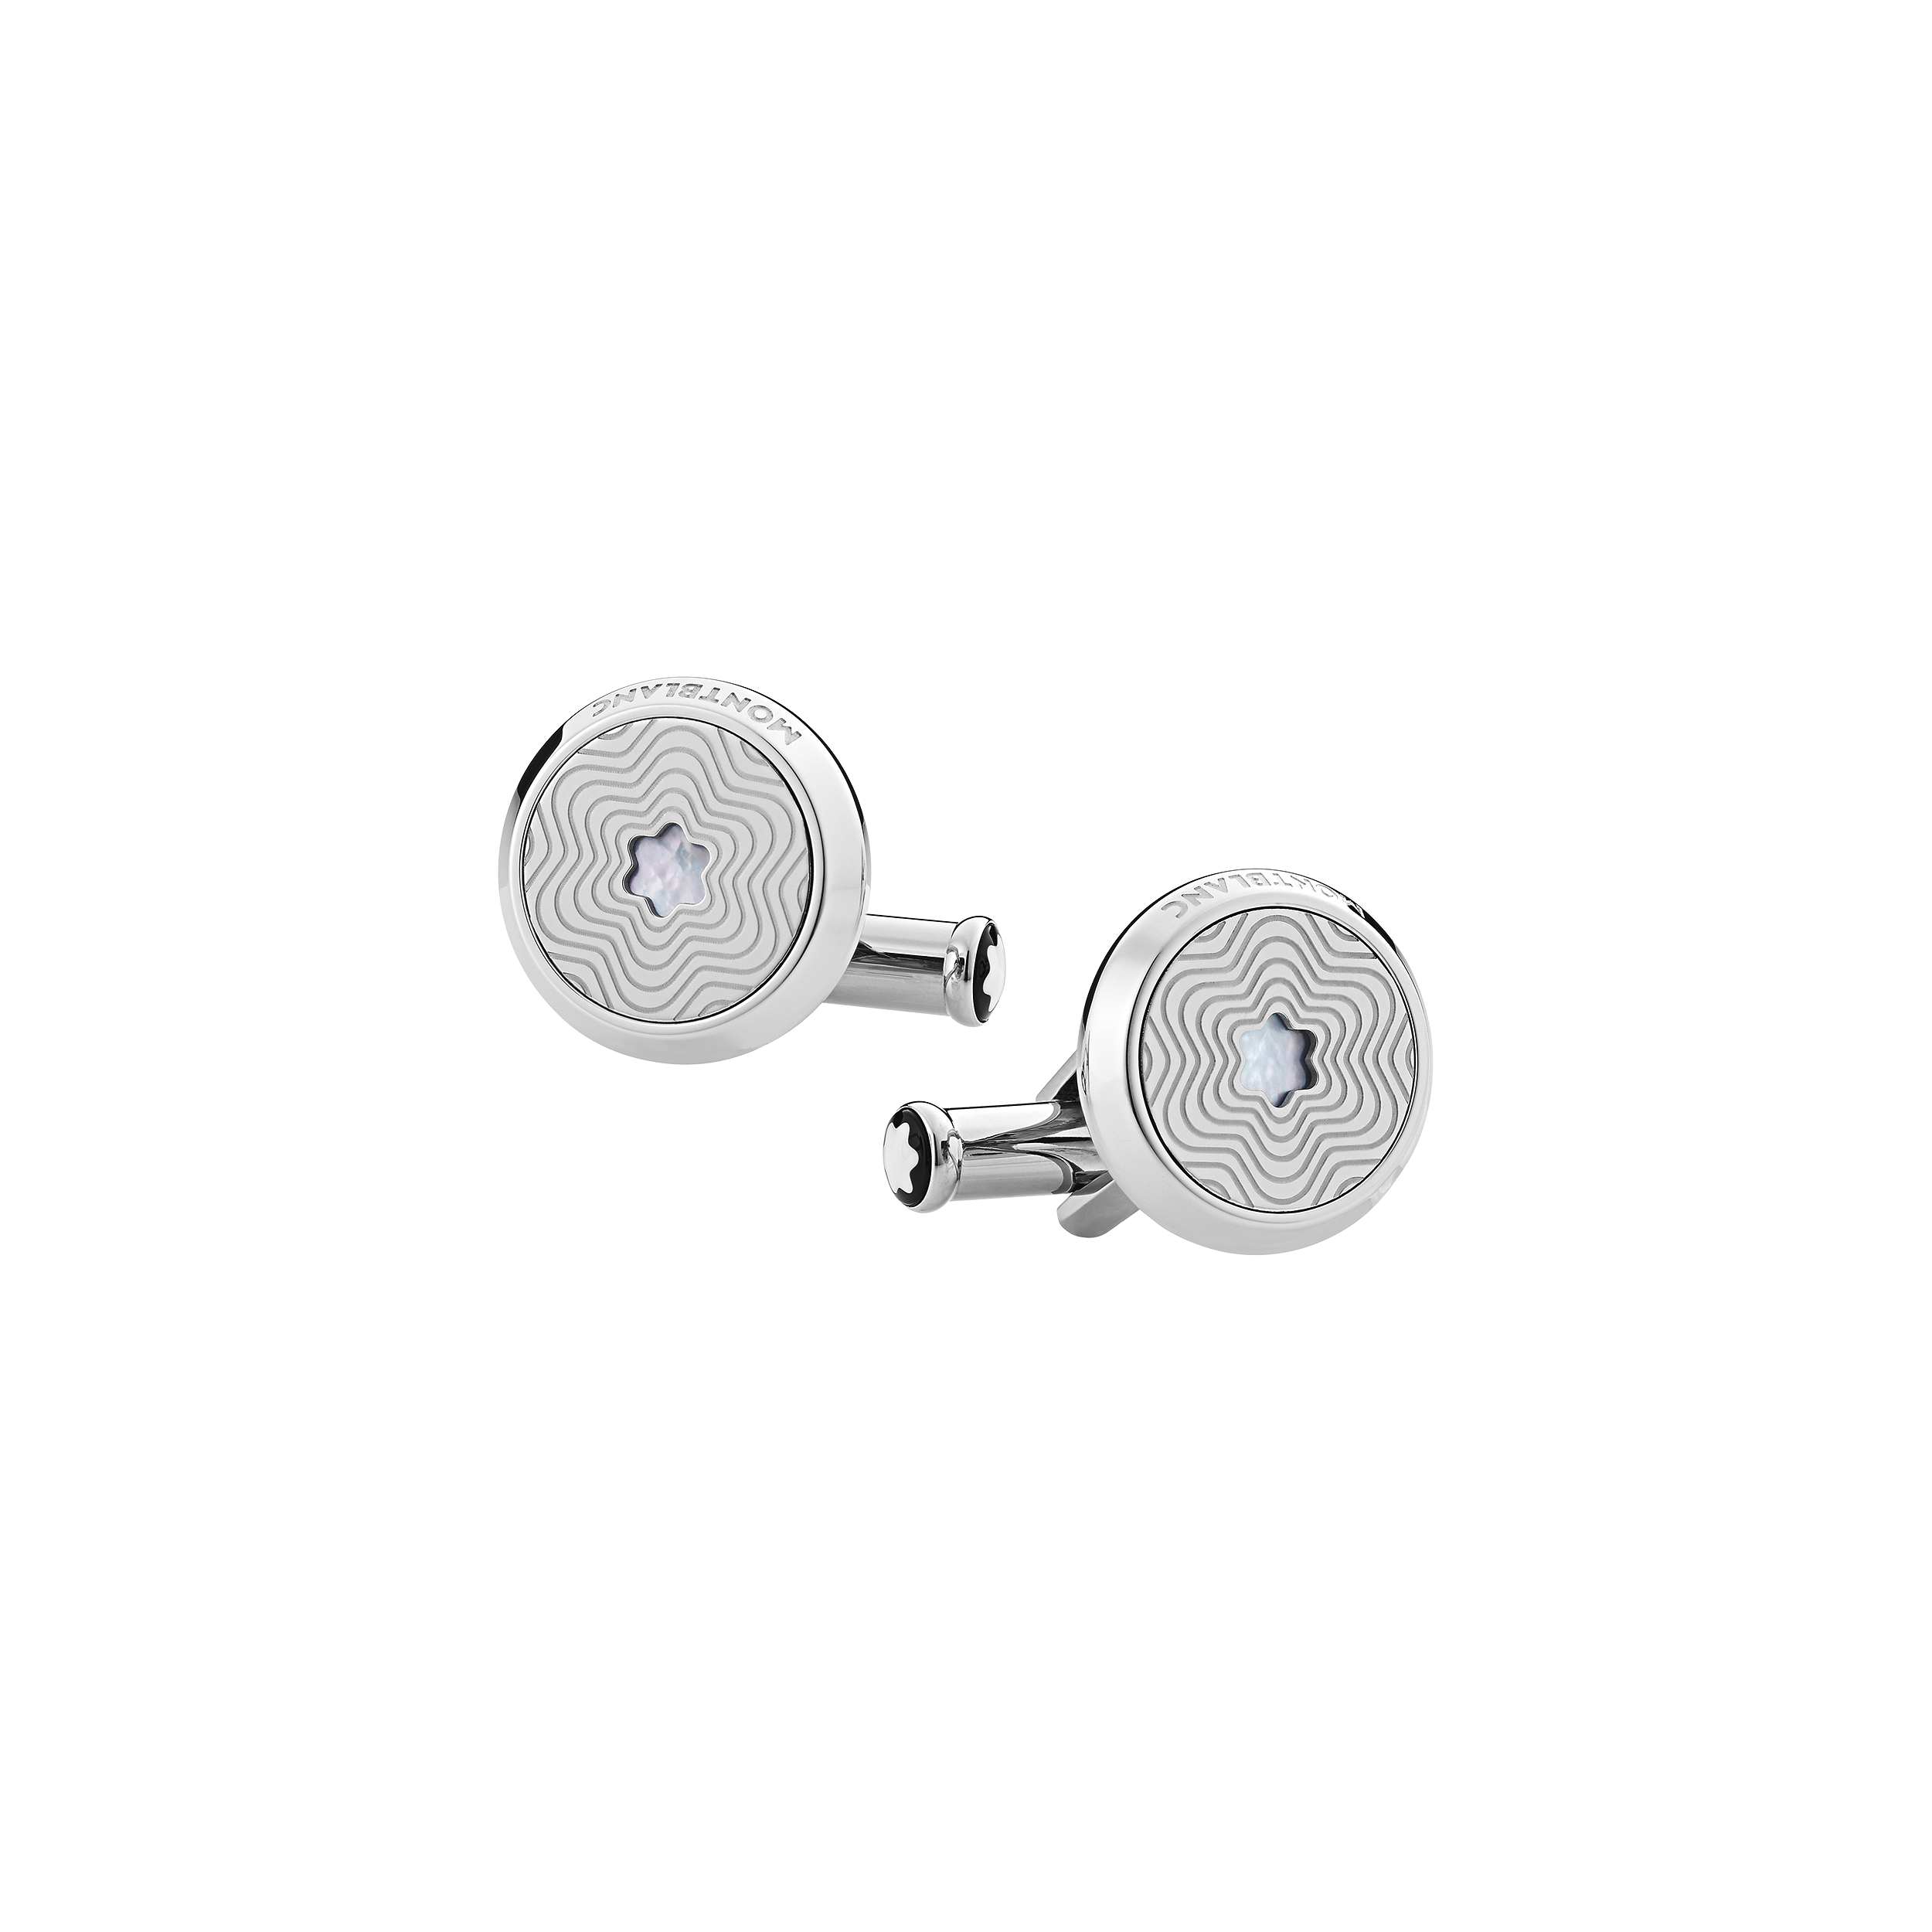 Cufflinks, round in stainless steel with exploding star pattern and mother-of-pearl snowcap emblem, image 1